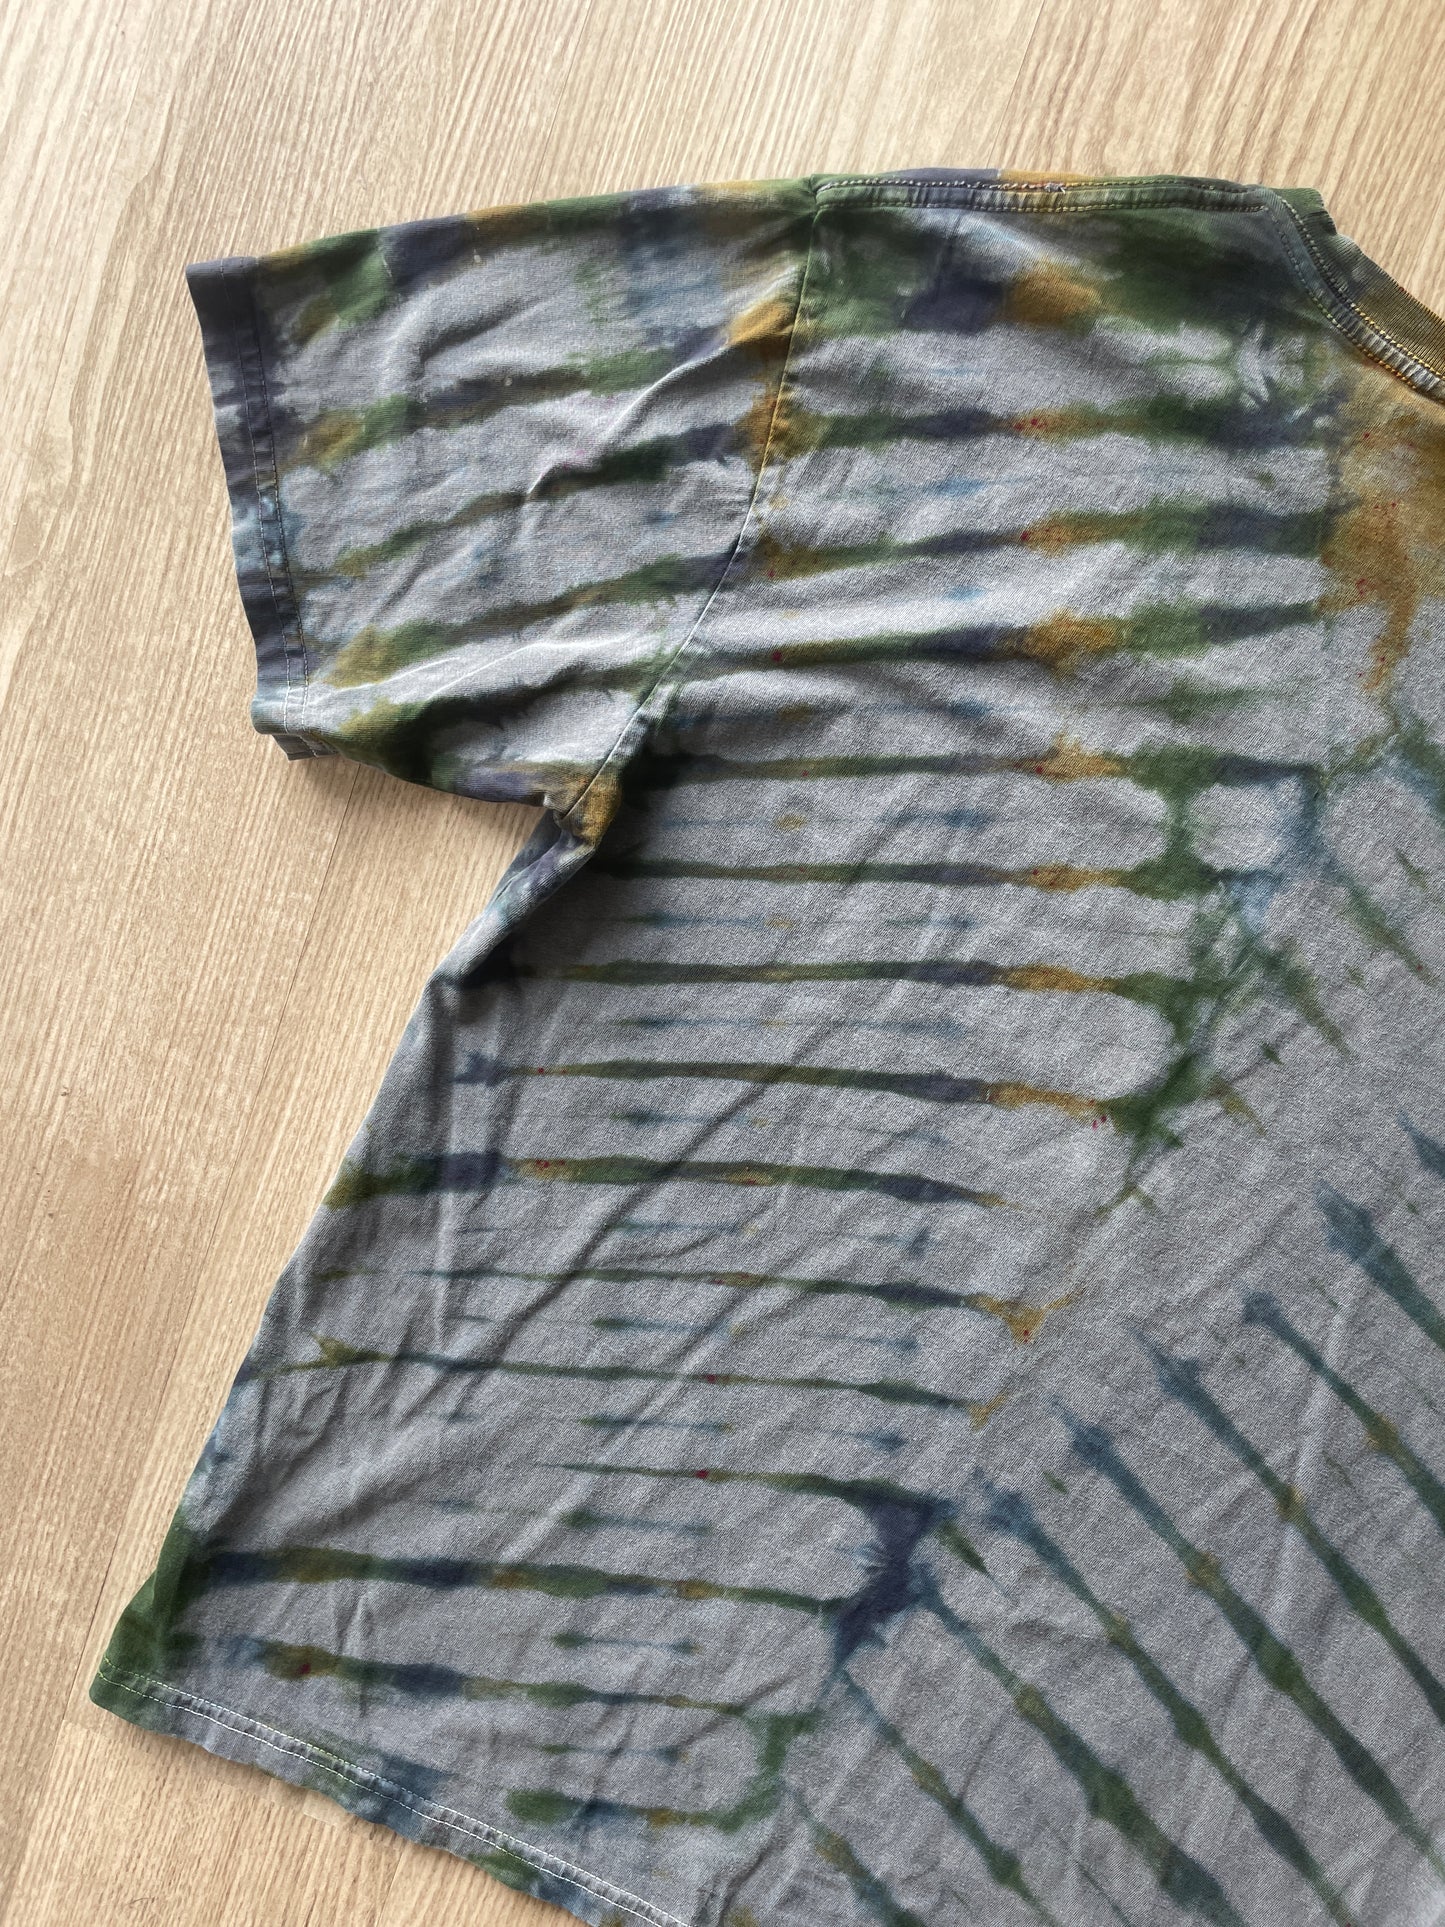 SMALL Men’s Earth Tones Handmade Tie Dye T-Shirt | One-Of-a-Kind Gray, Green, and Blue Pleated Short Sleeve